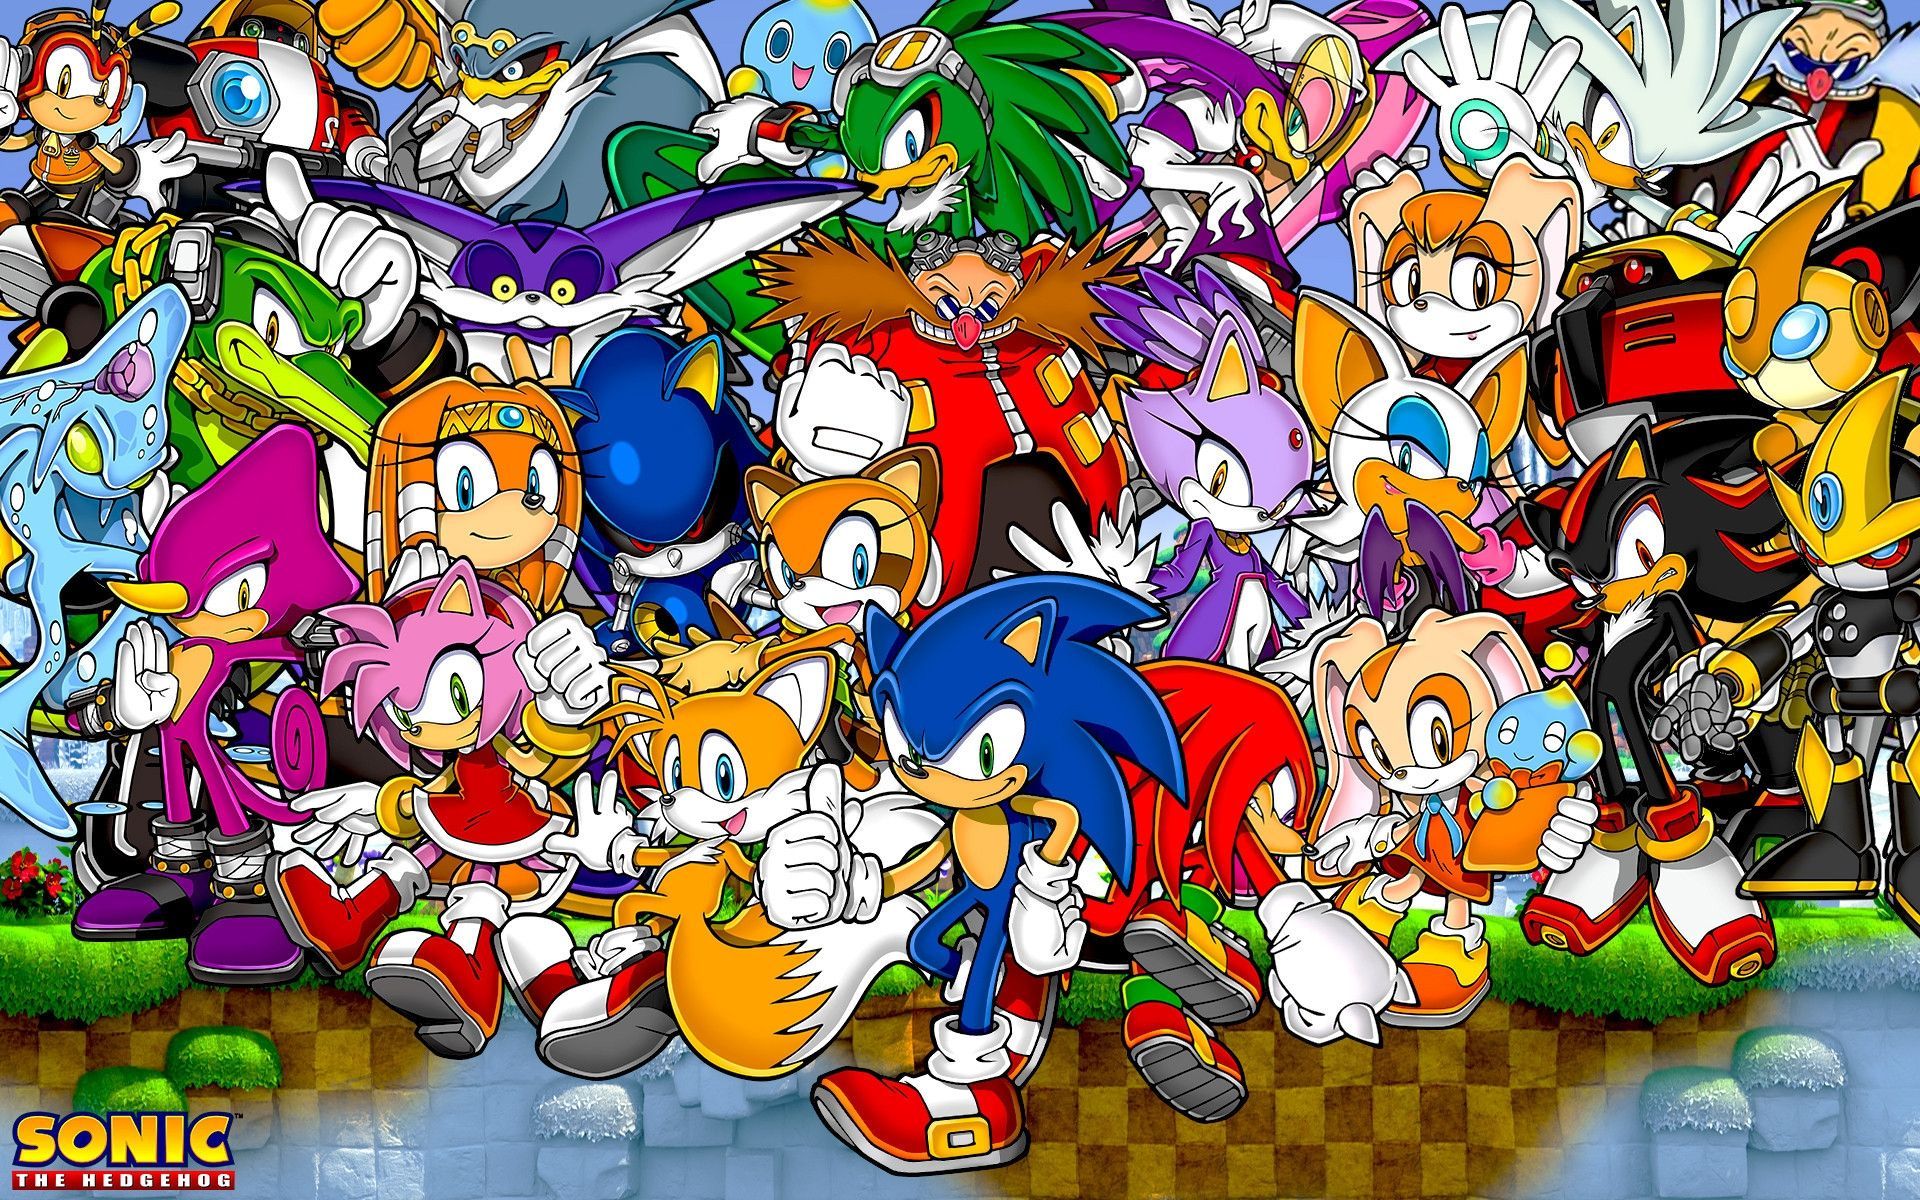 Sonic X Wallpaper On Wallpaperplay pertaining to The Amazing Sonic X Wallpaper. Friend anime, Friends wallpaper, Cartoon wallpaper